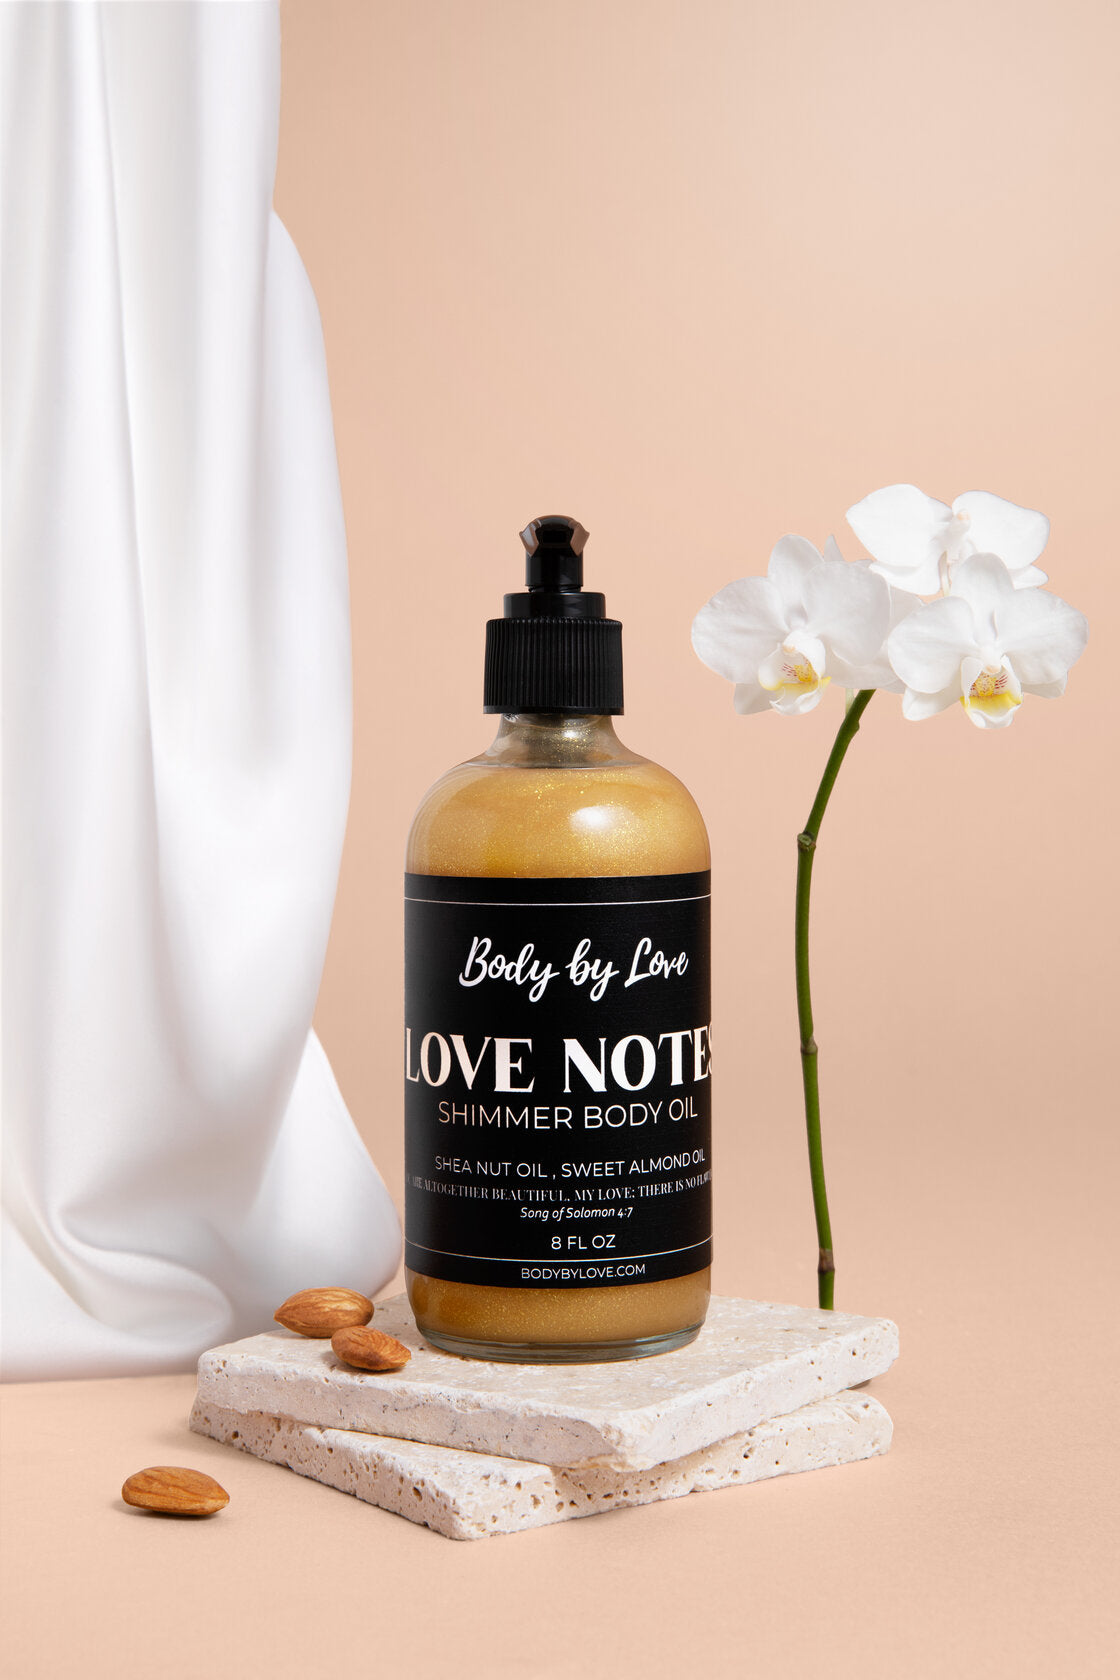 Body by Love Shimmer Body Oil. Our body oil is a luxury body oil, a dry skin body oil, and an organic body oil.